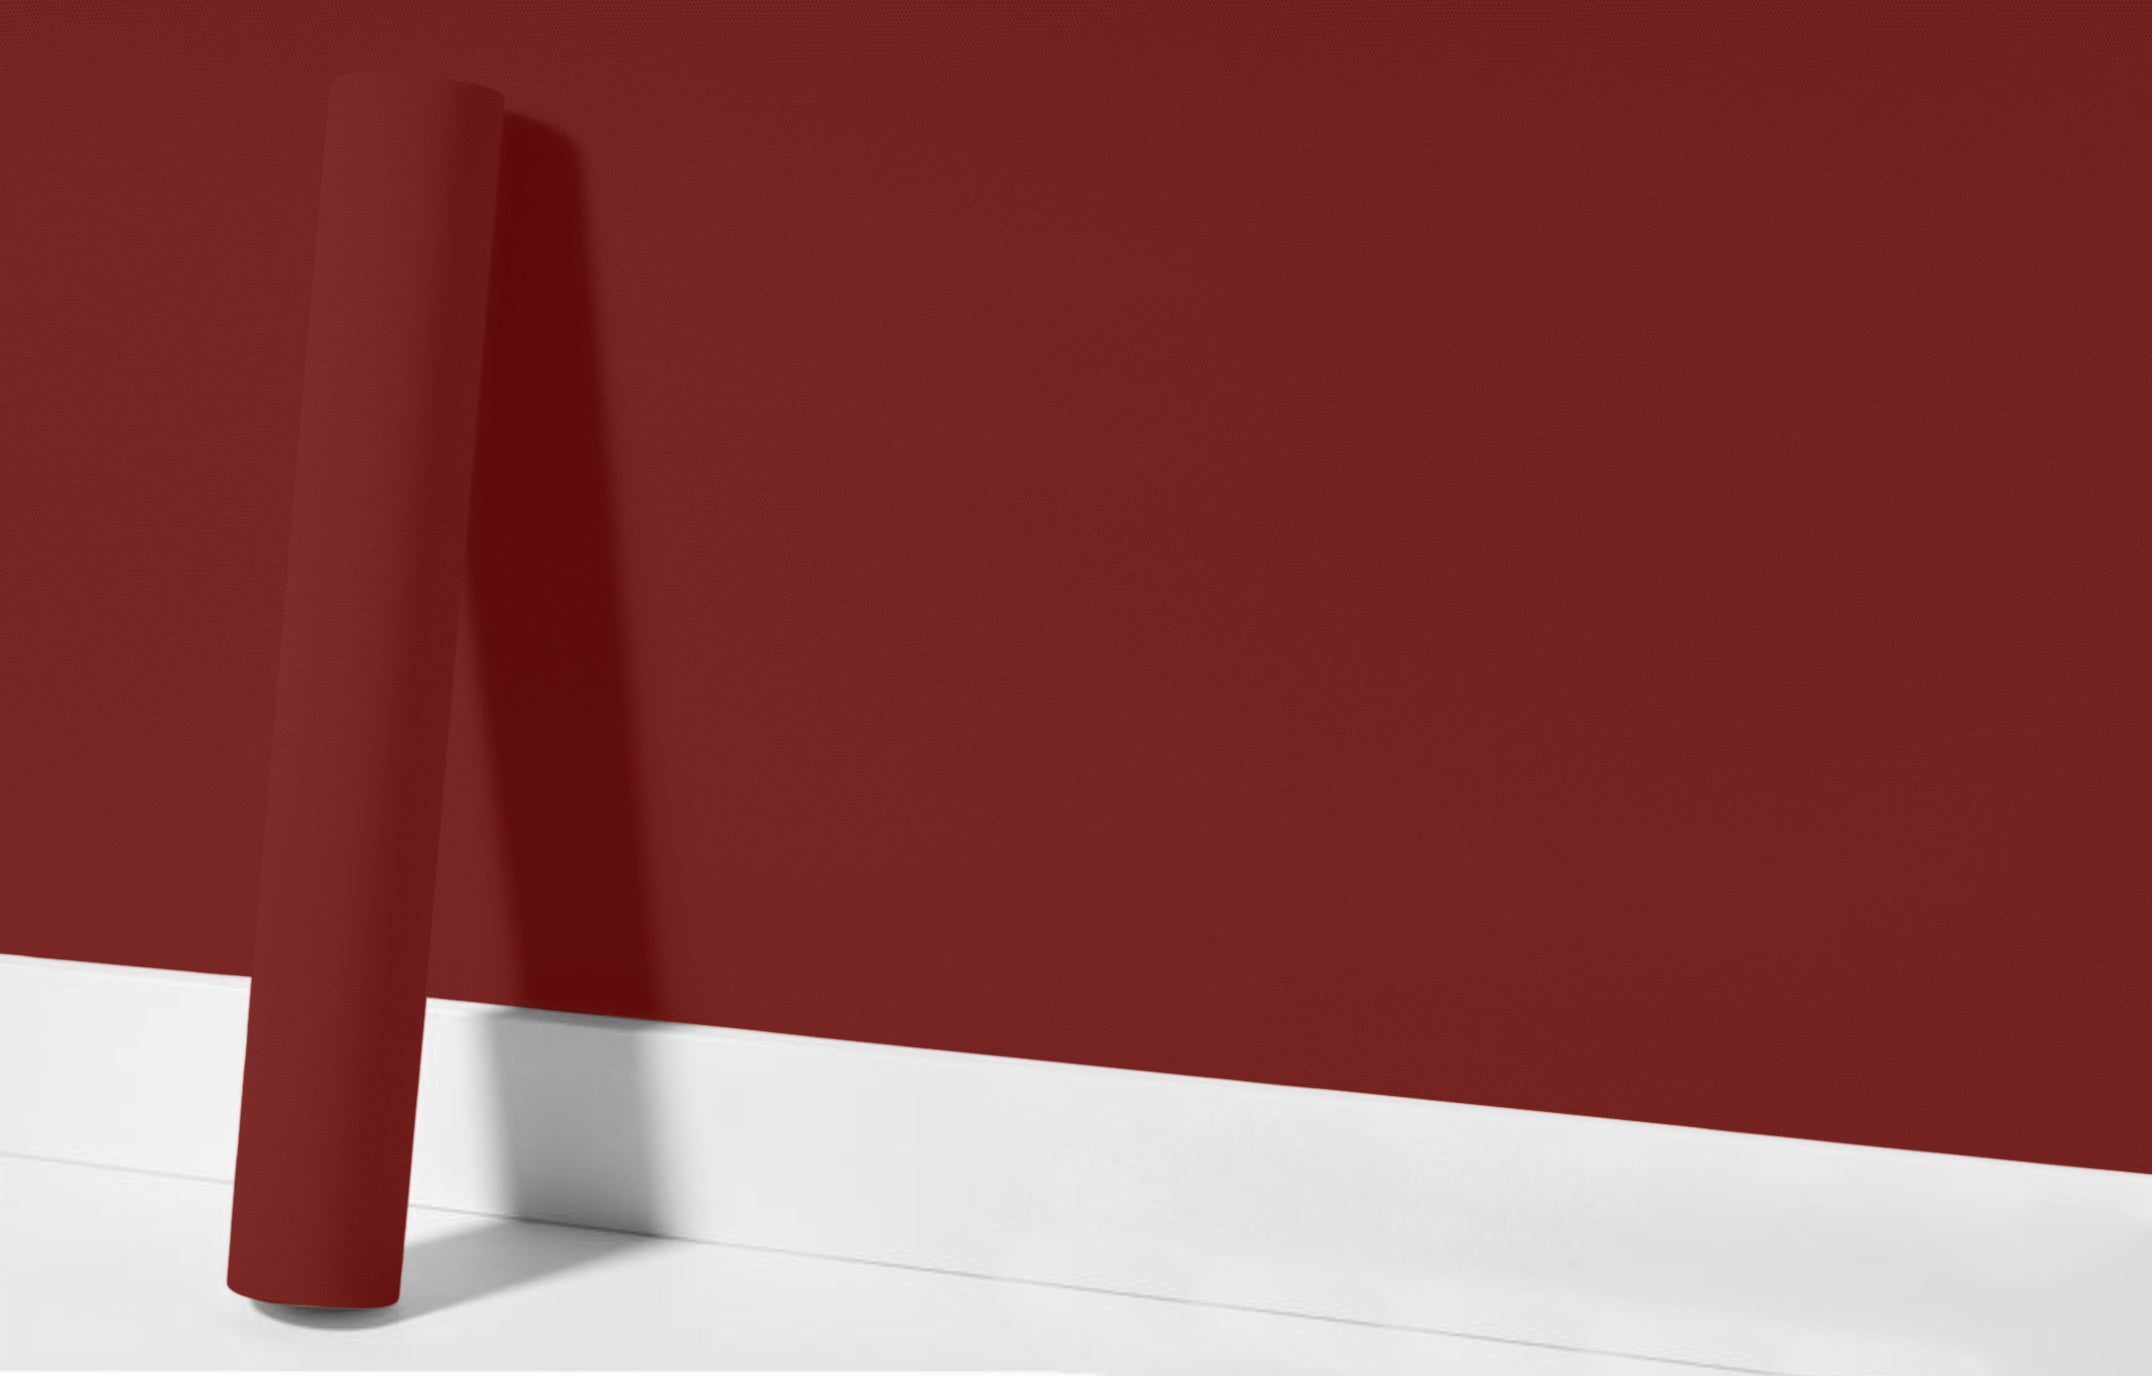 Peel & Stick Removable Re-usable Paint - Color RAL 3011 Brown Red - offRAL™ - RALRAW LLC, USA